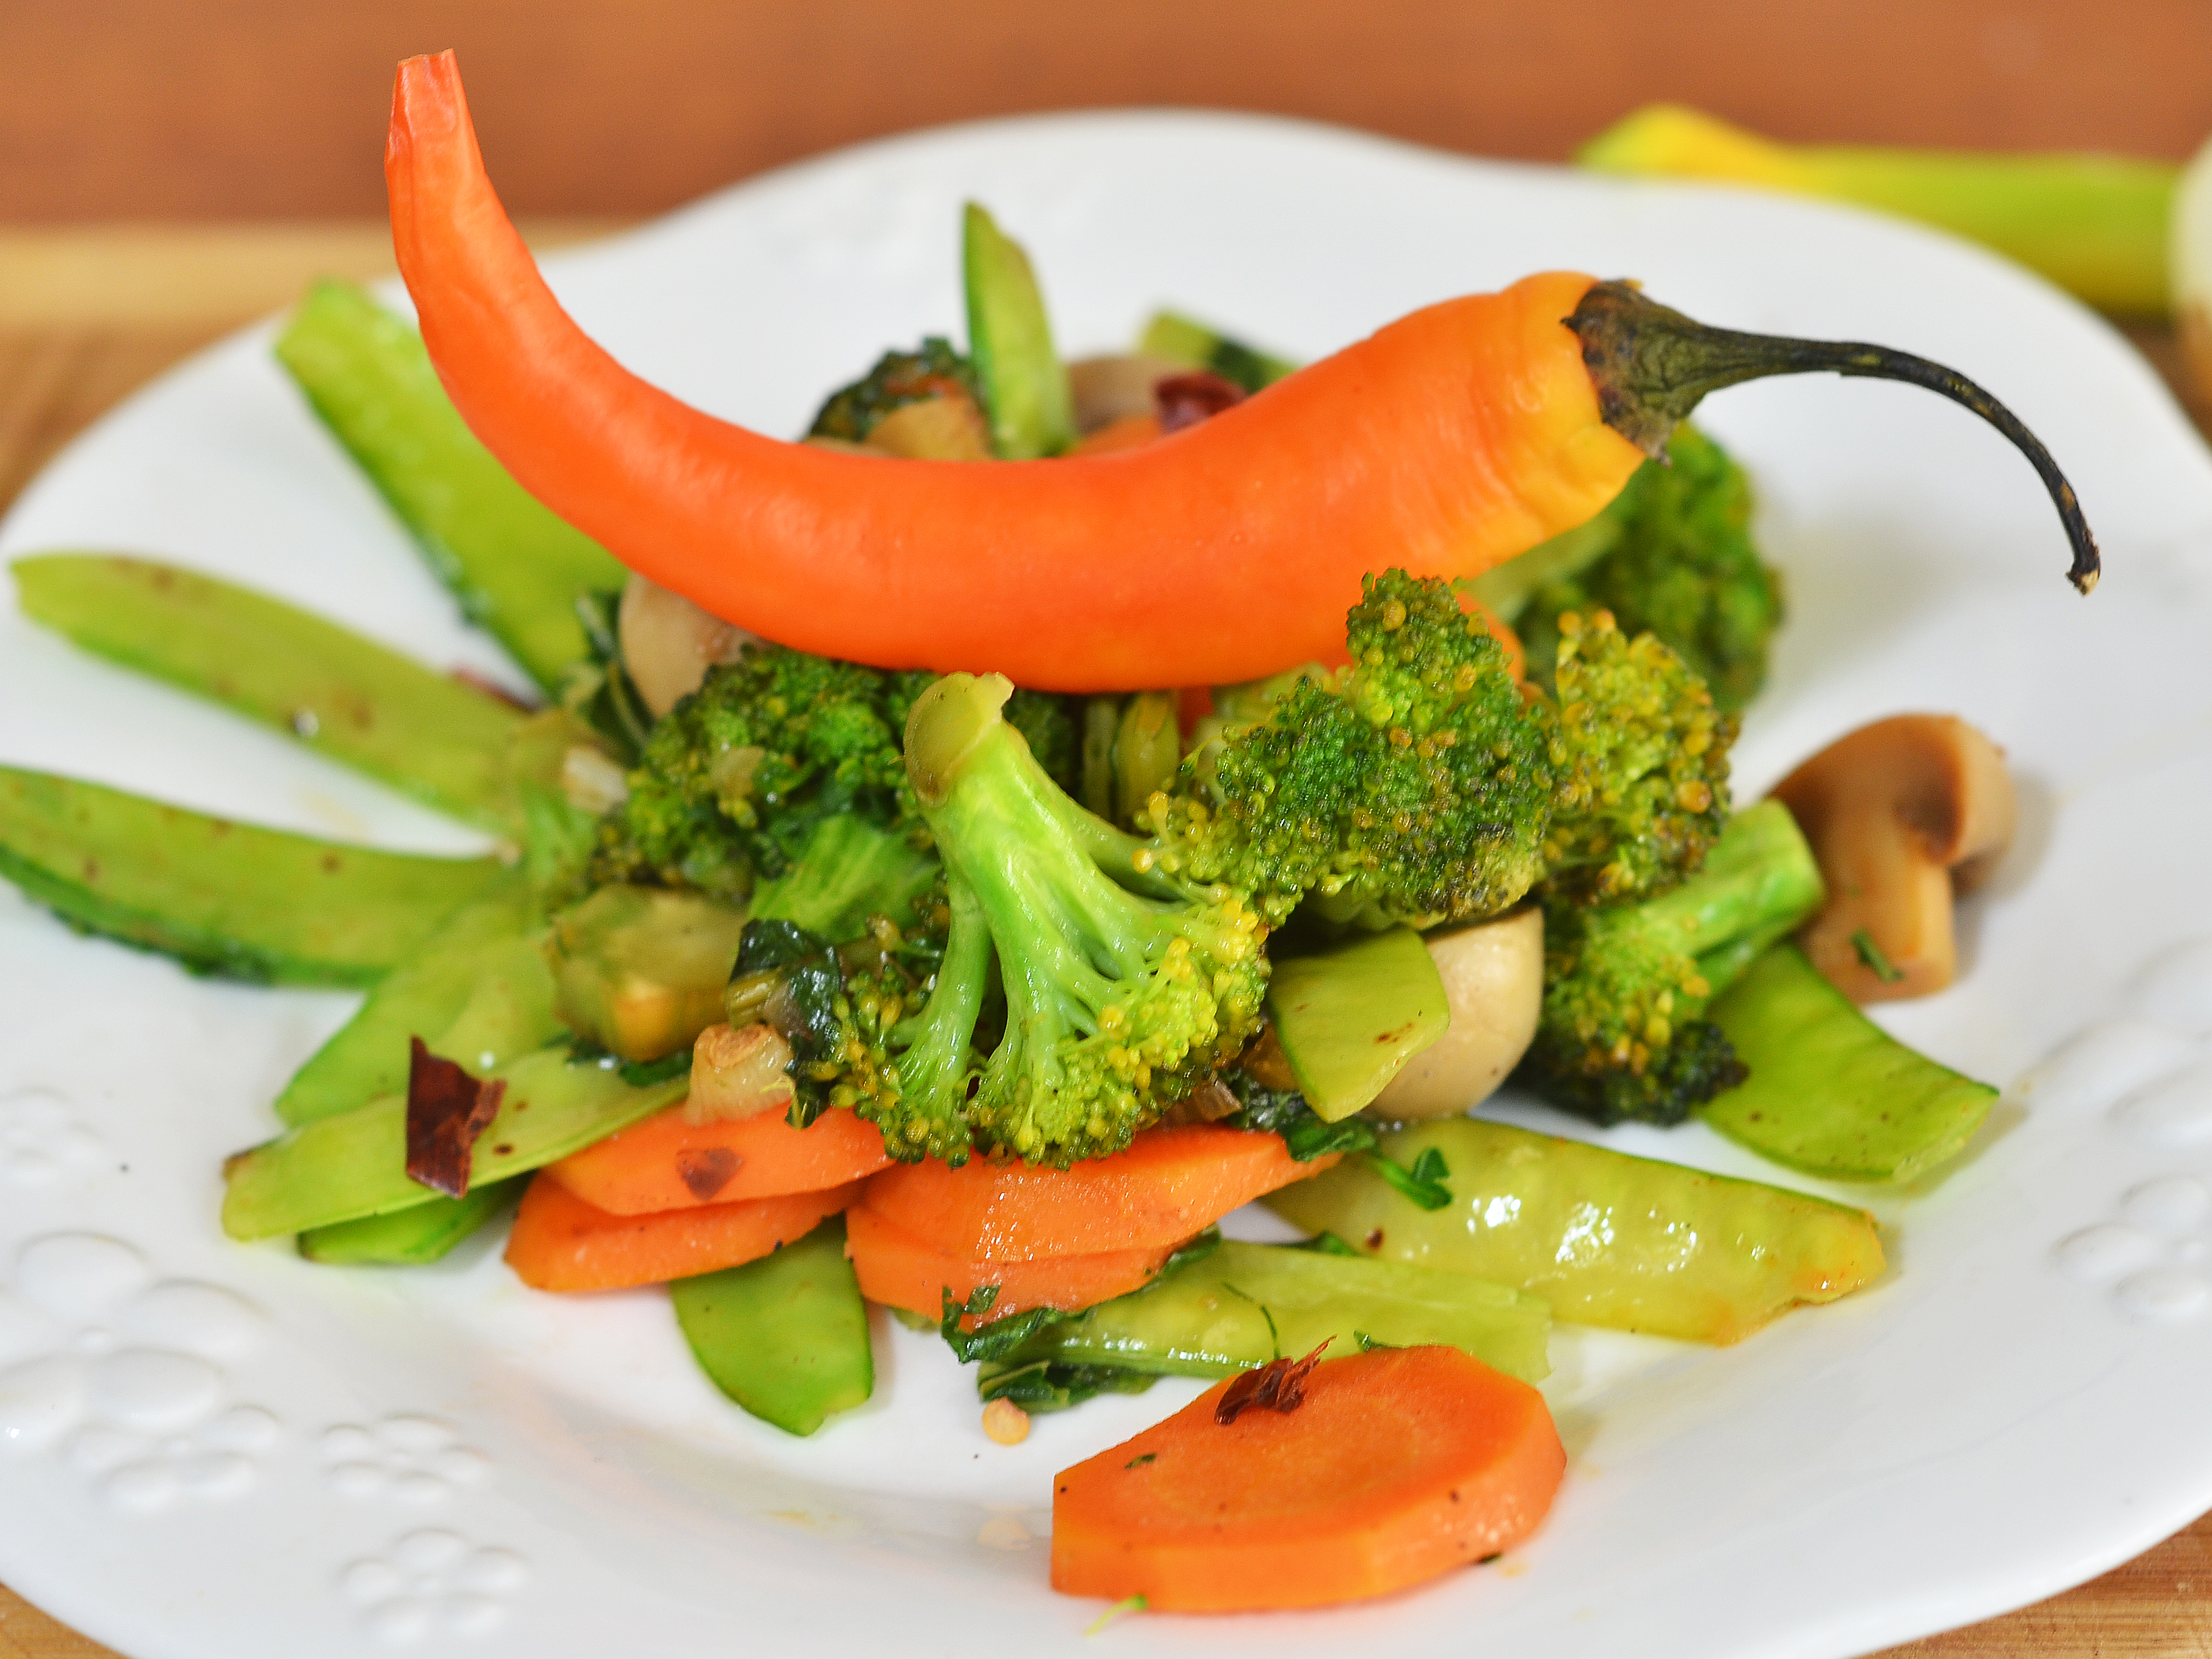 How to Make Spicy Stir Fried Vegetables: 7 Steps (with Pictures)